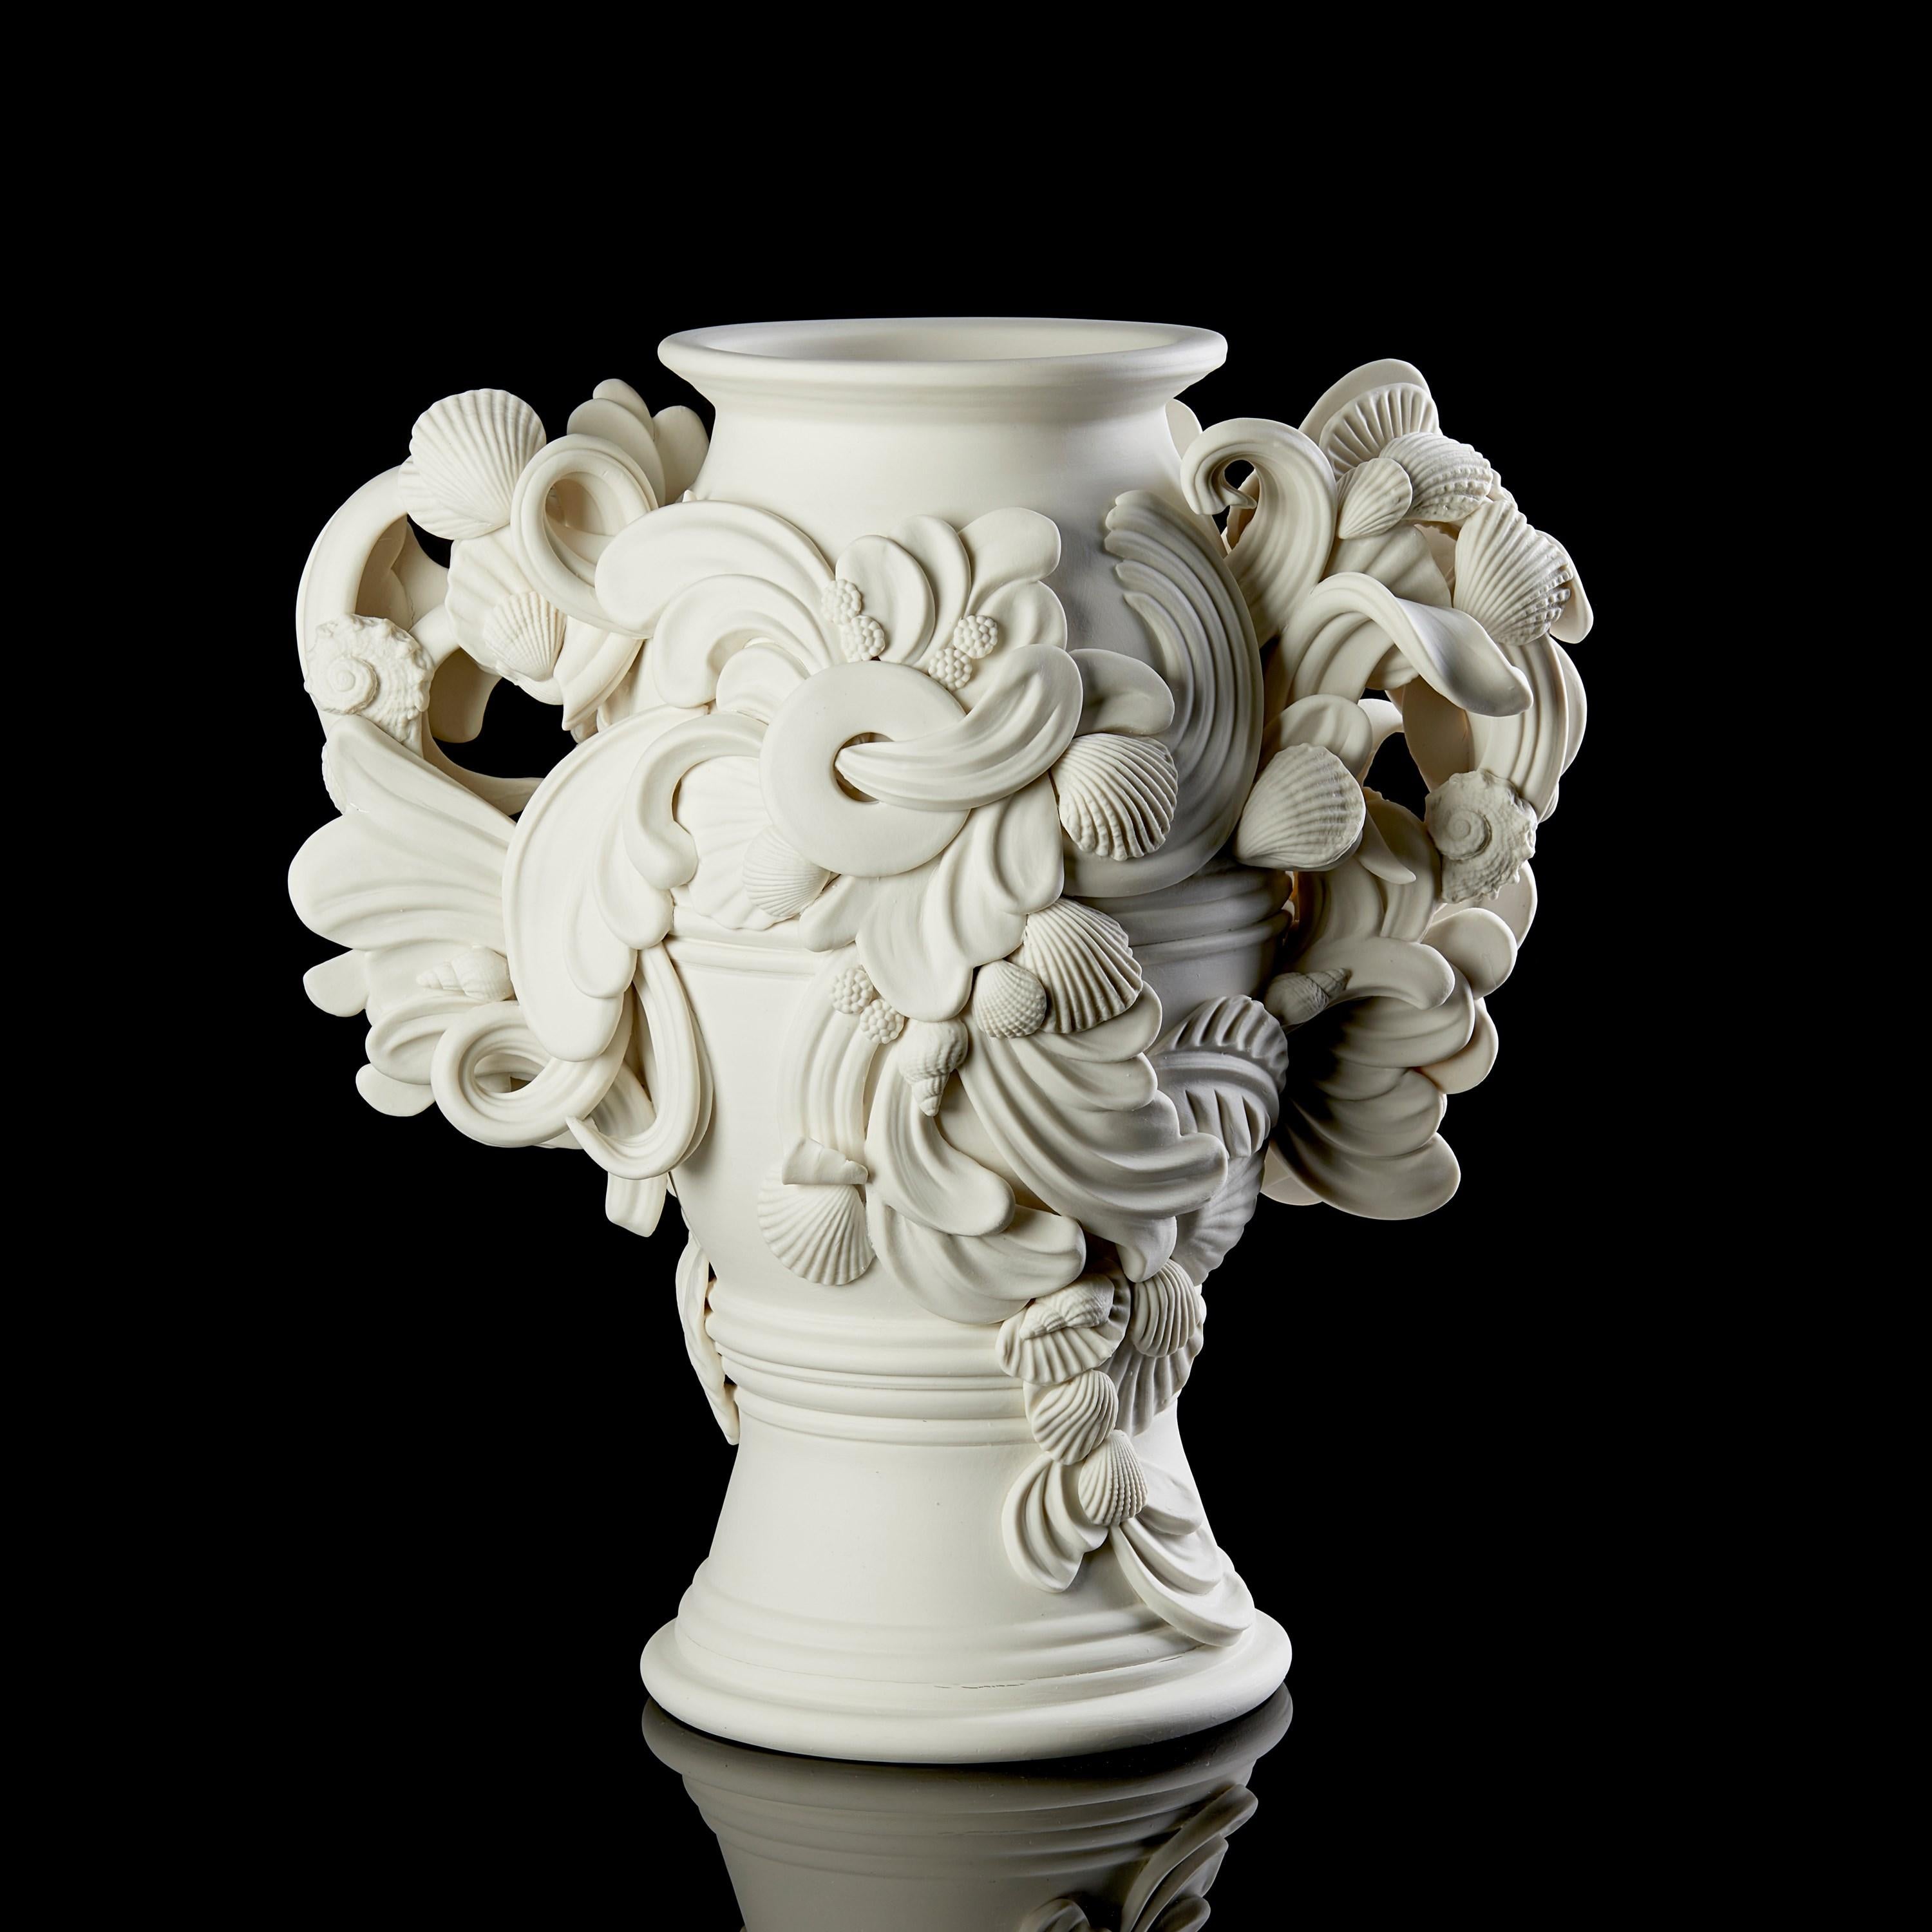 Porcelain Rocaille IV, rococo inspired porcelain vessel with swirls & shells by Jo Taylor For Sale